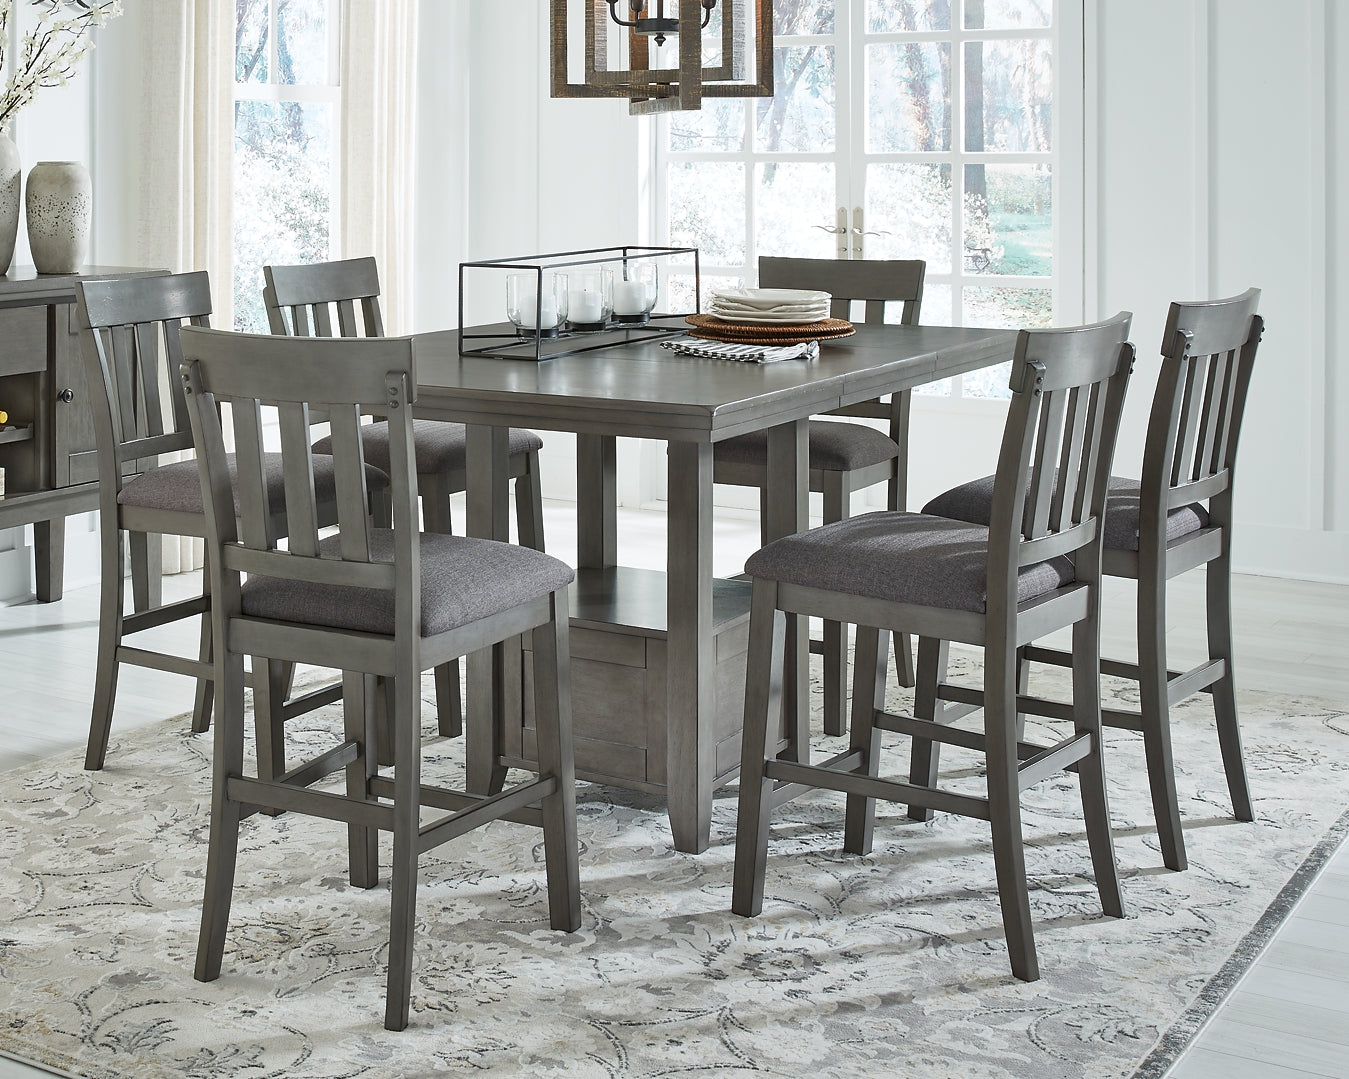 Hallanden Counter Height Dining Table and 6 Barstools with Storage JB's Furniture  Home Furniture, Home Decor, Furniture Store